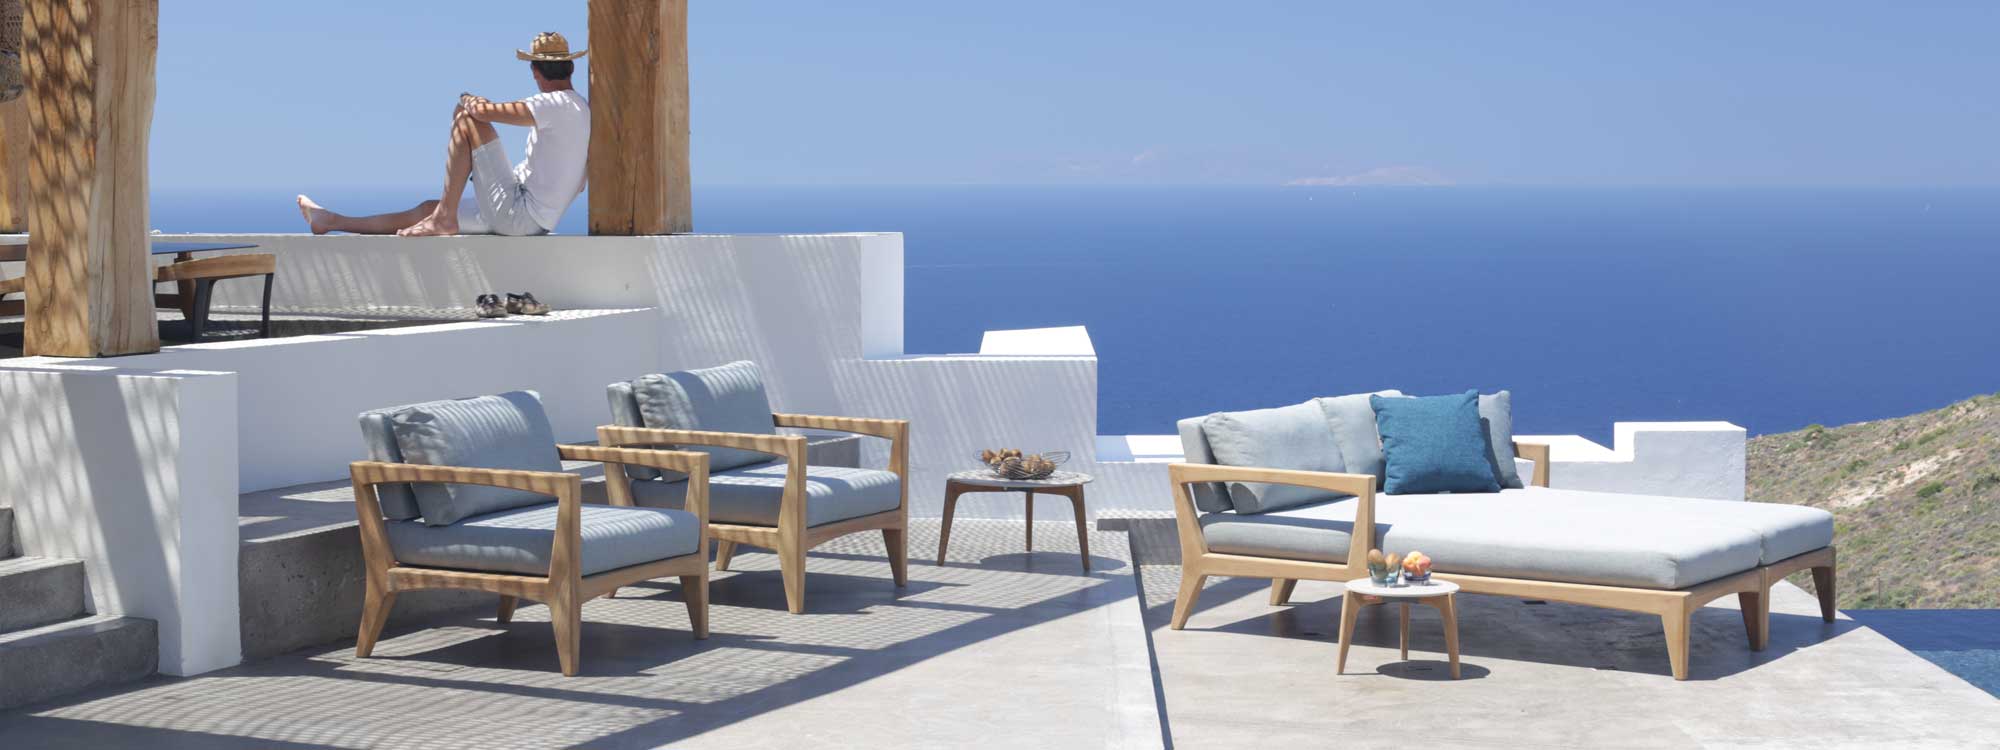 Image of Royal Botania Zenhit teak lounge chairs and daybeds on Greek island terrace overlooking the Mediterranean.